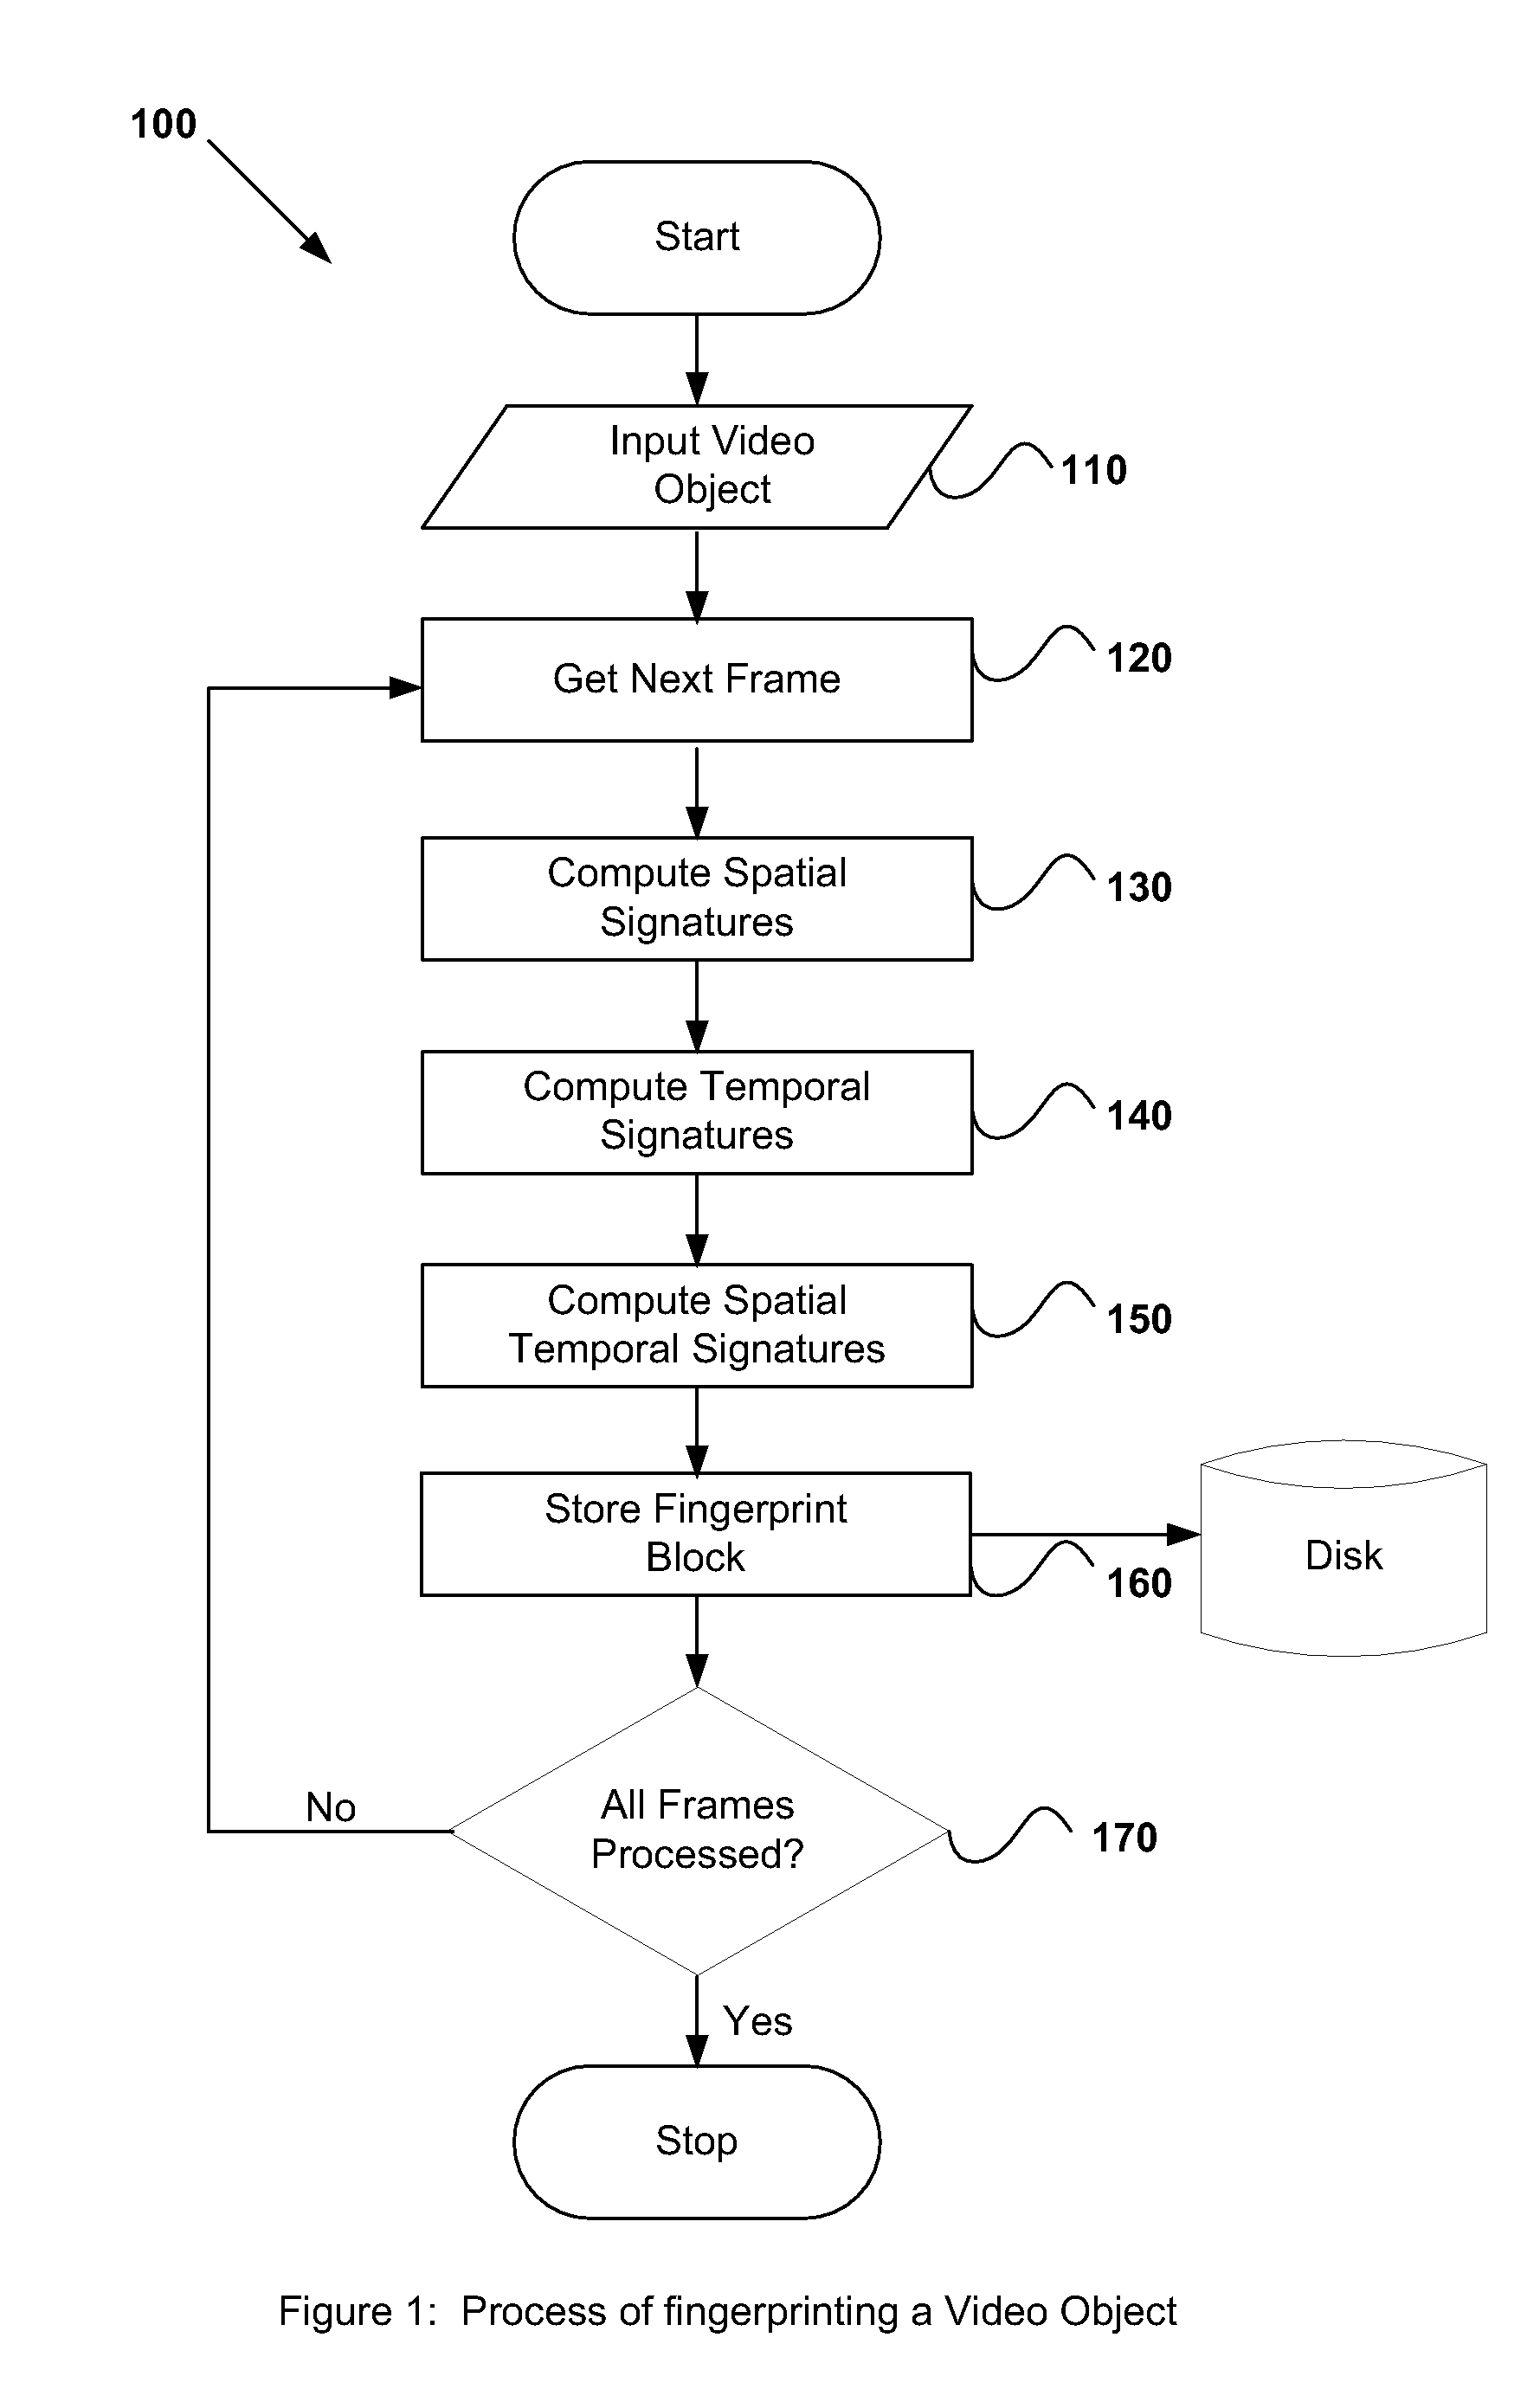 Method and system for fingerprinting digital video object based on multiersolution, multirate spatial and temporal signatures